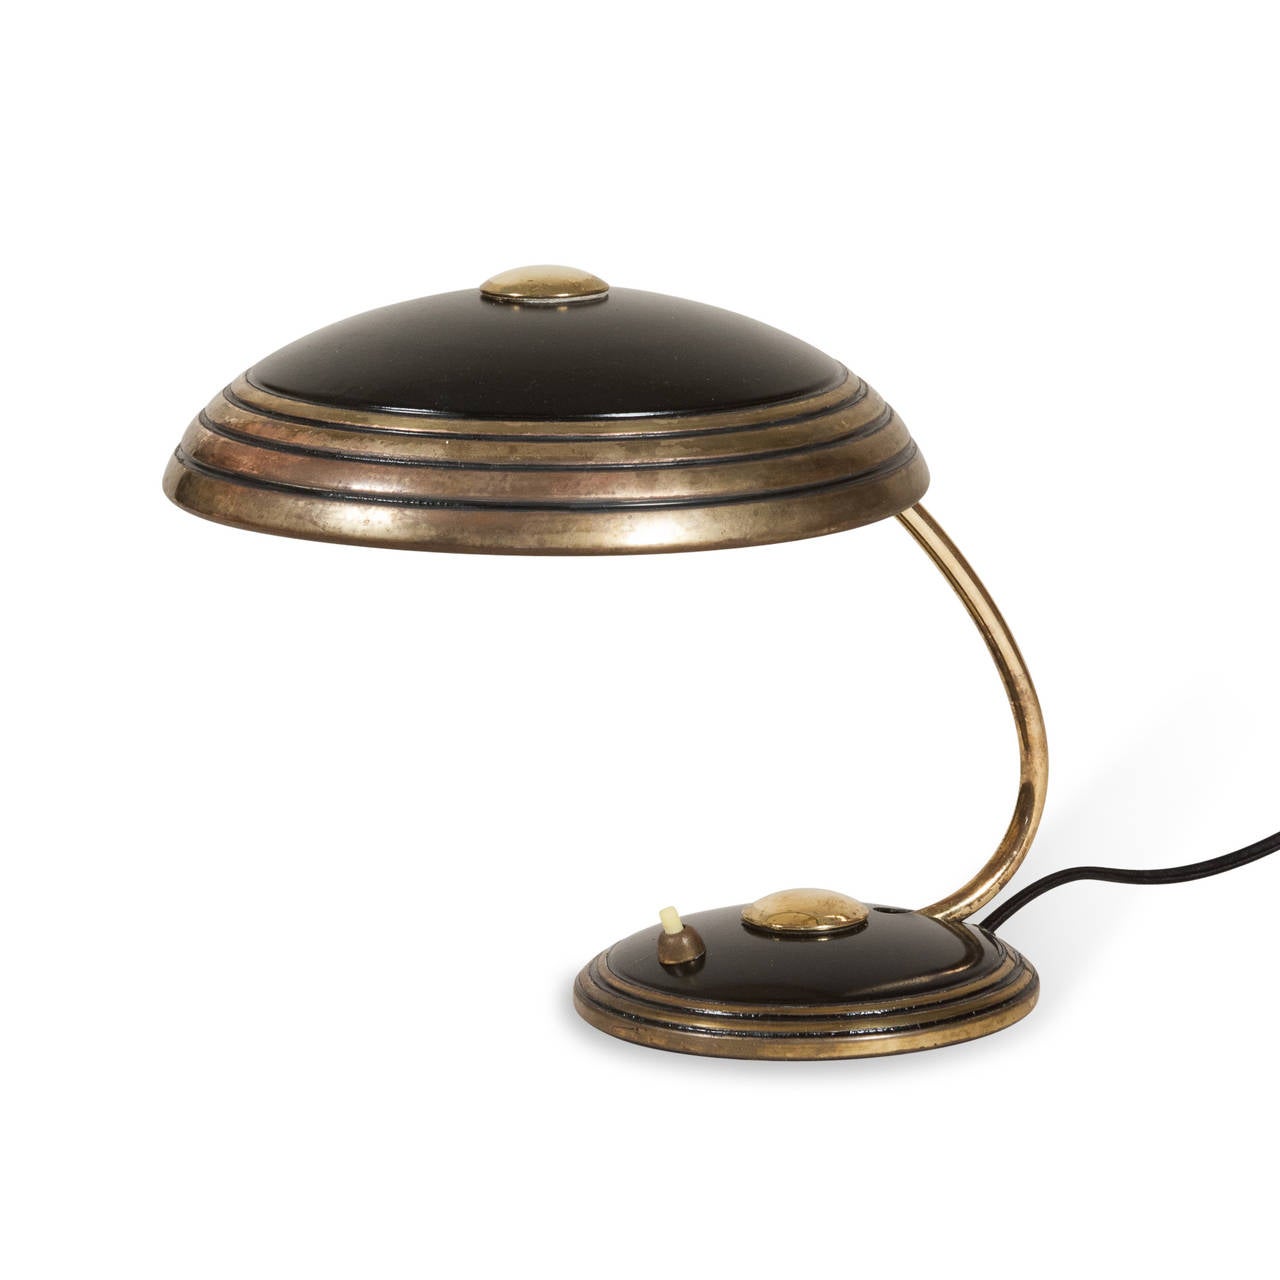 Patinated brass and black lacquered metal dome desk lamp, the shade as well as the arm pivoting up and down by Helo, German, 1950s. Signed to underside. Height in 9 1/2 in, diameter of shade 9 in. (Item #2288).